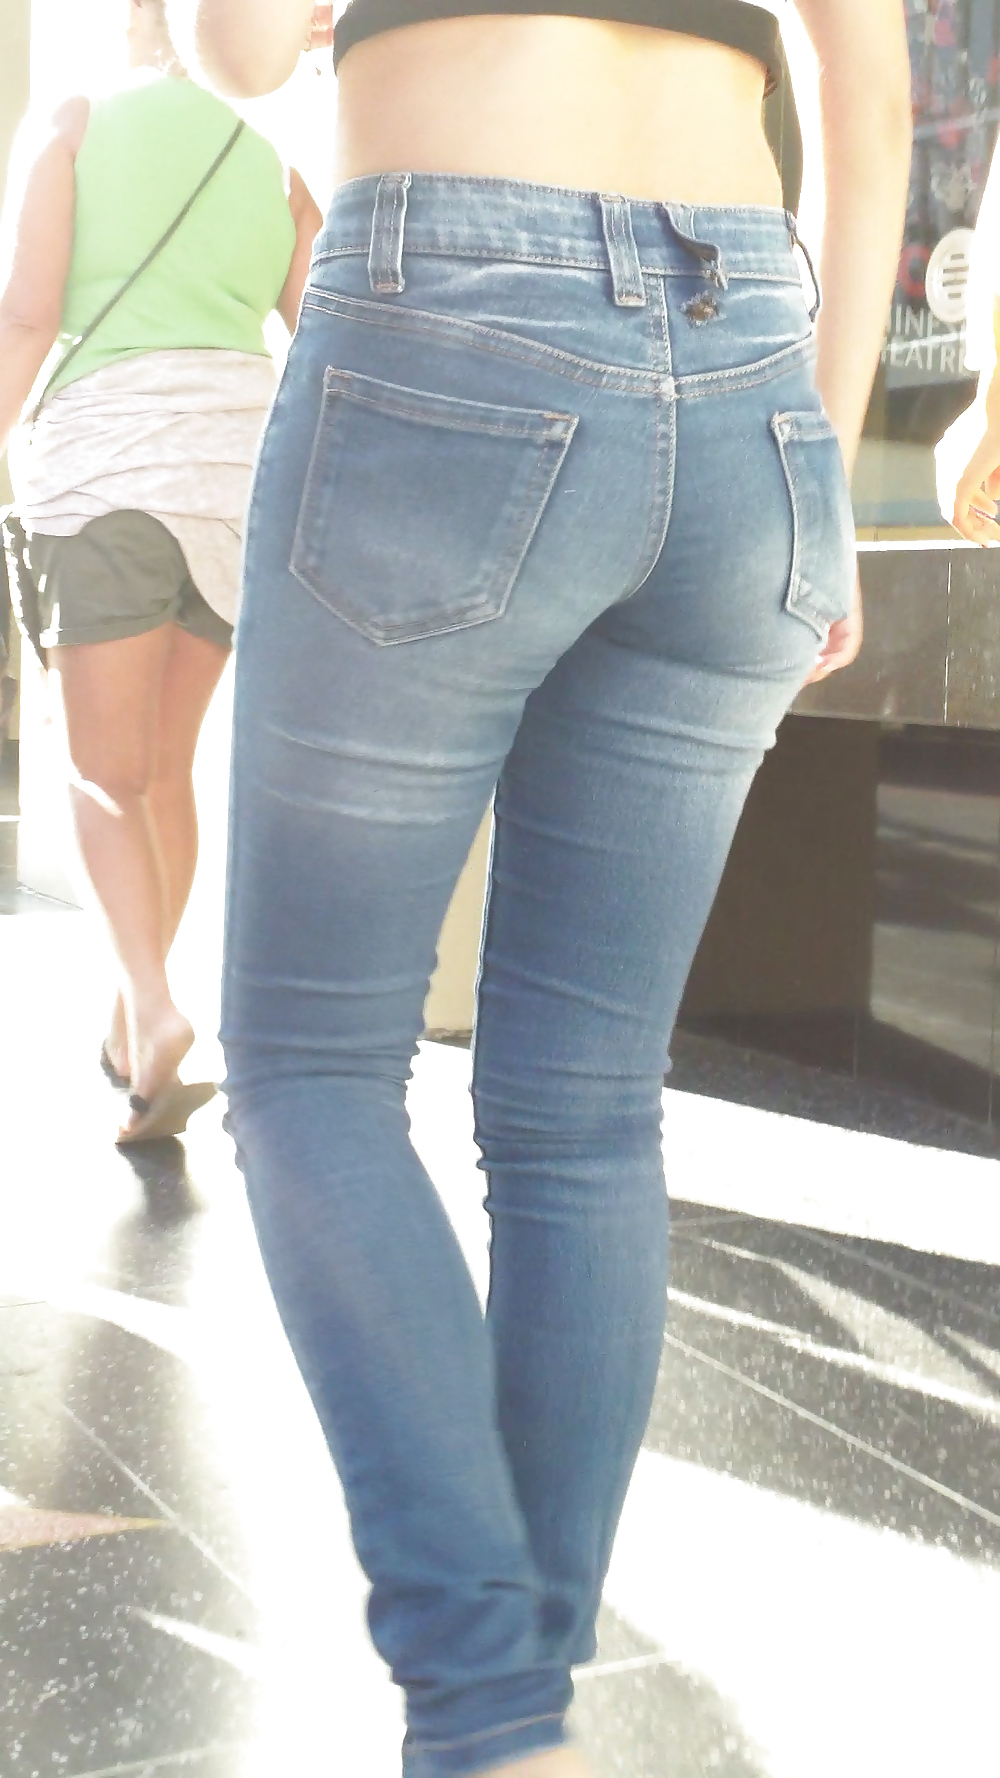 Beautiful Cute Tight Teen Ass And Butt In Blue Jeans 34